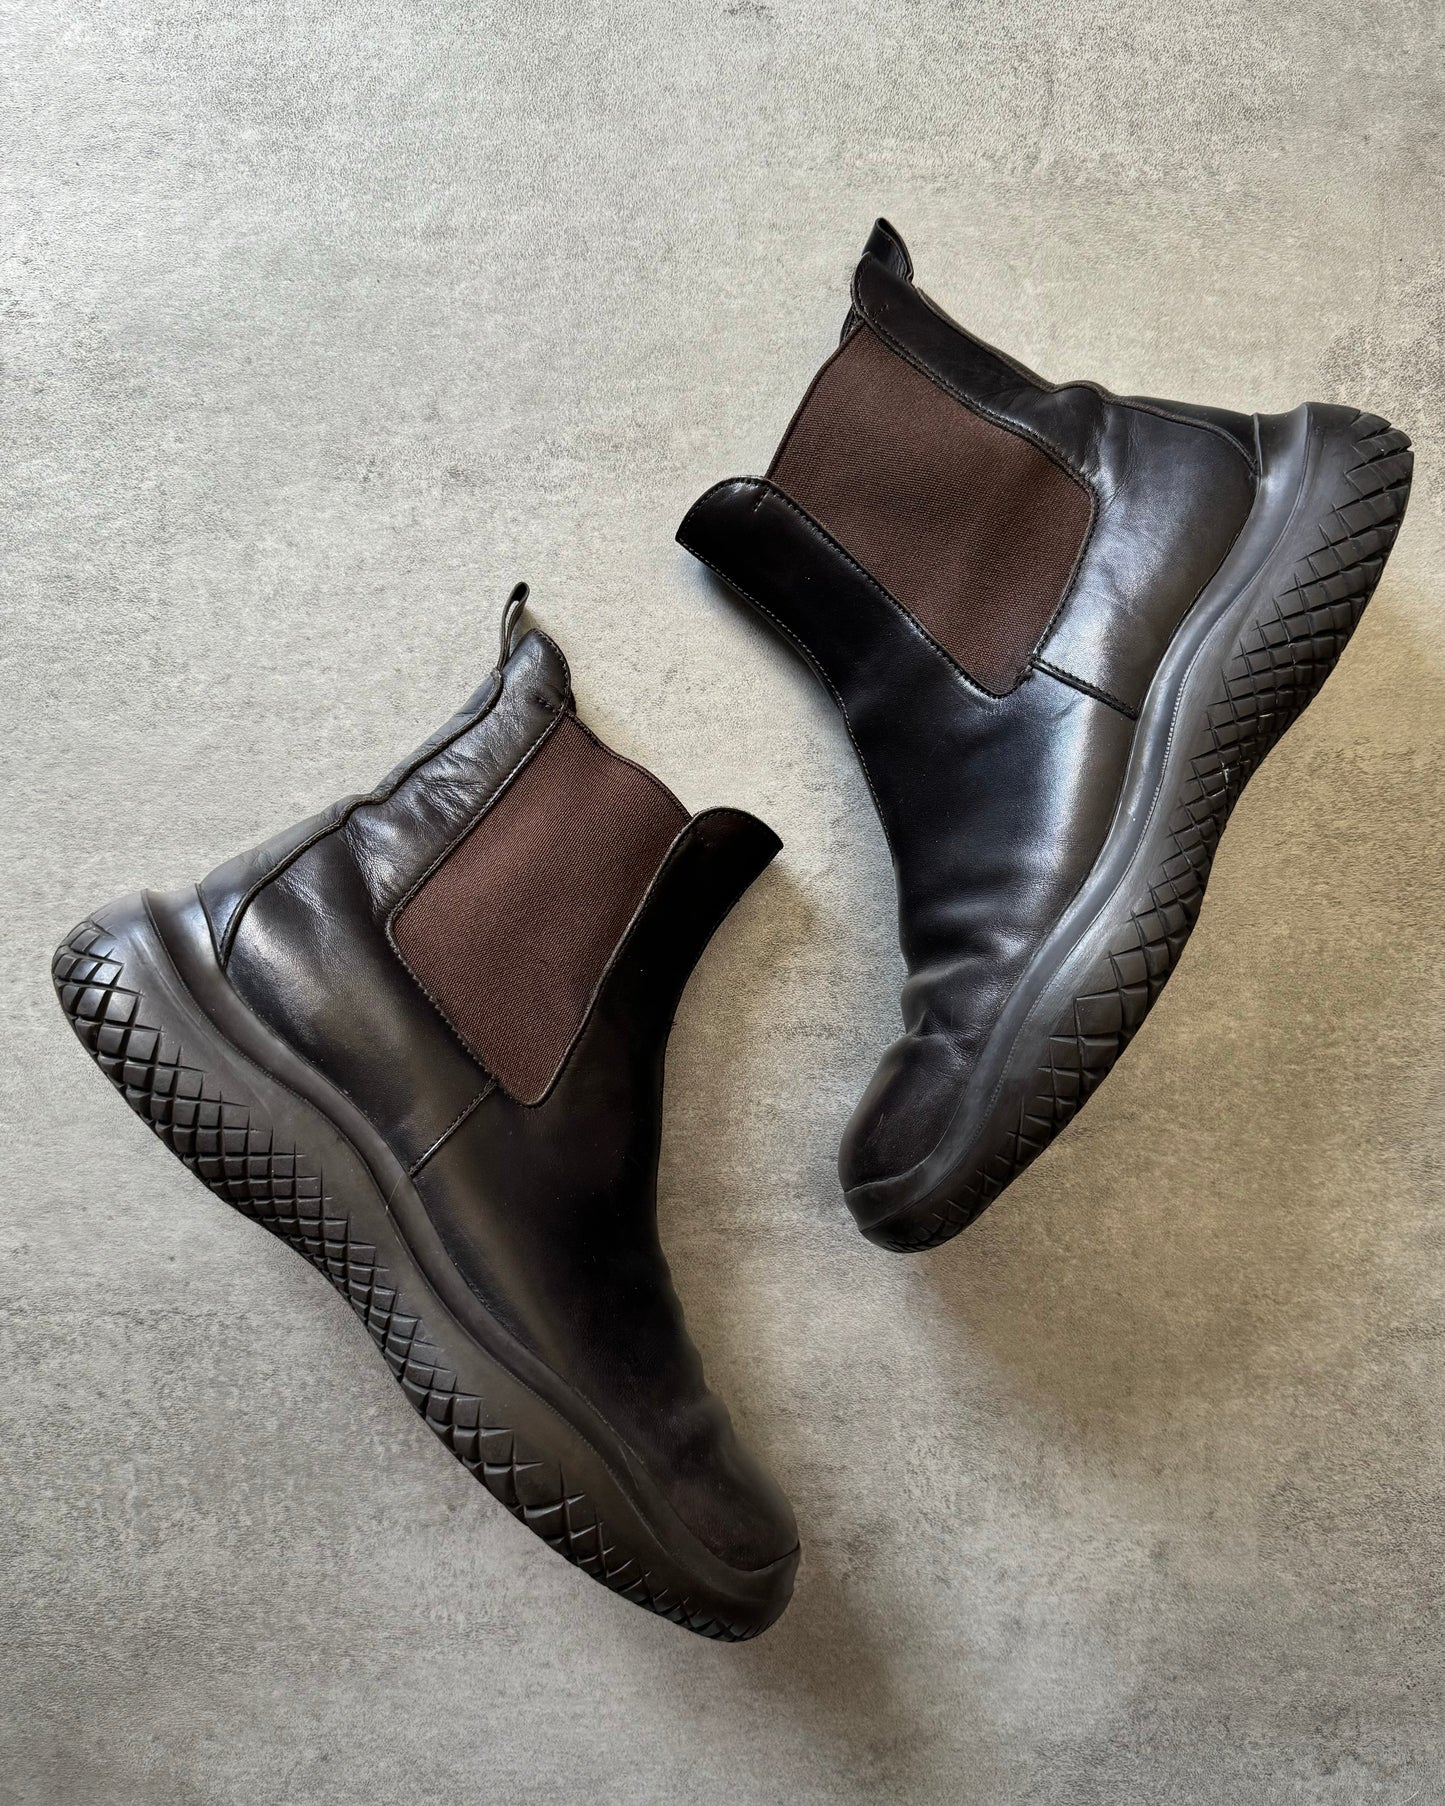 FW1999 Prada Brown Leather Boots (41) - 7